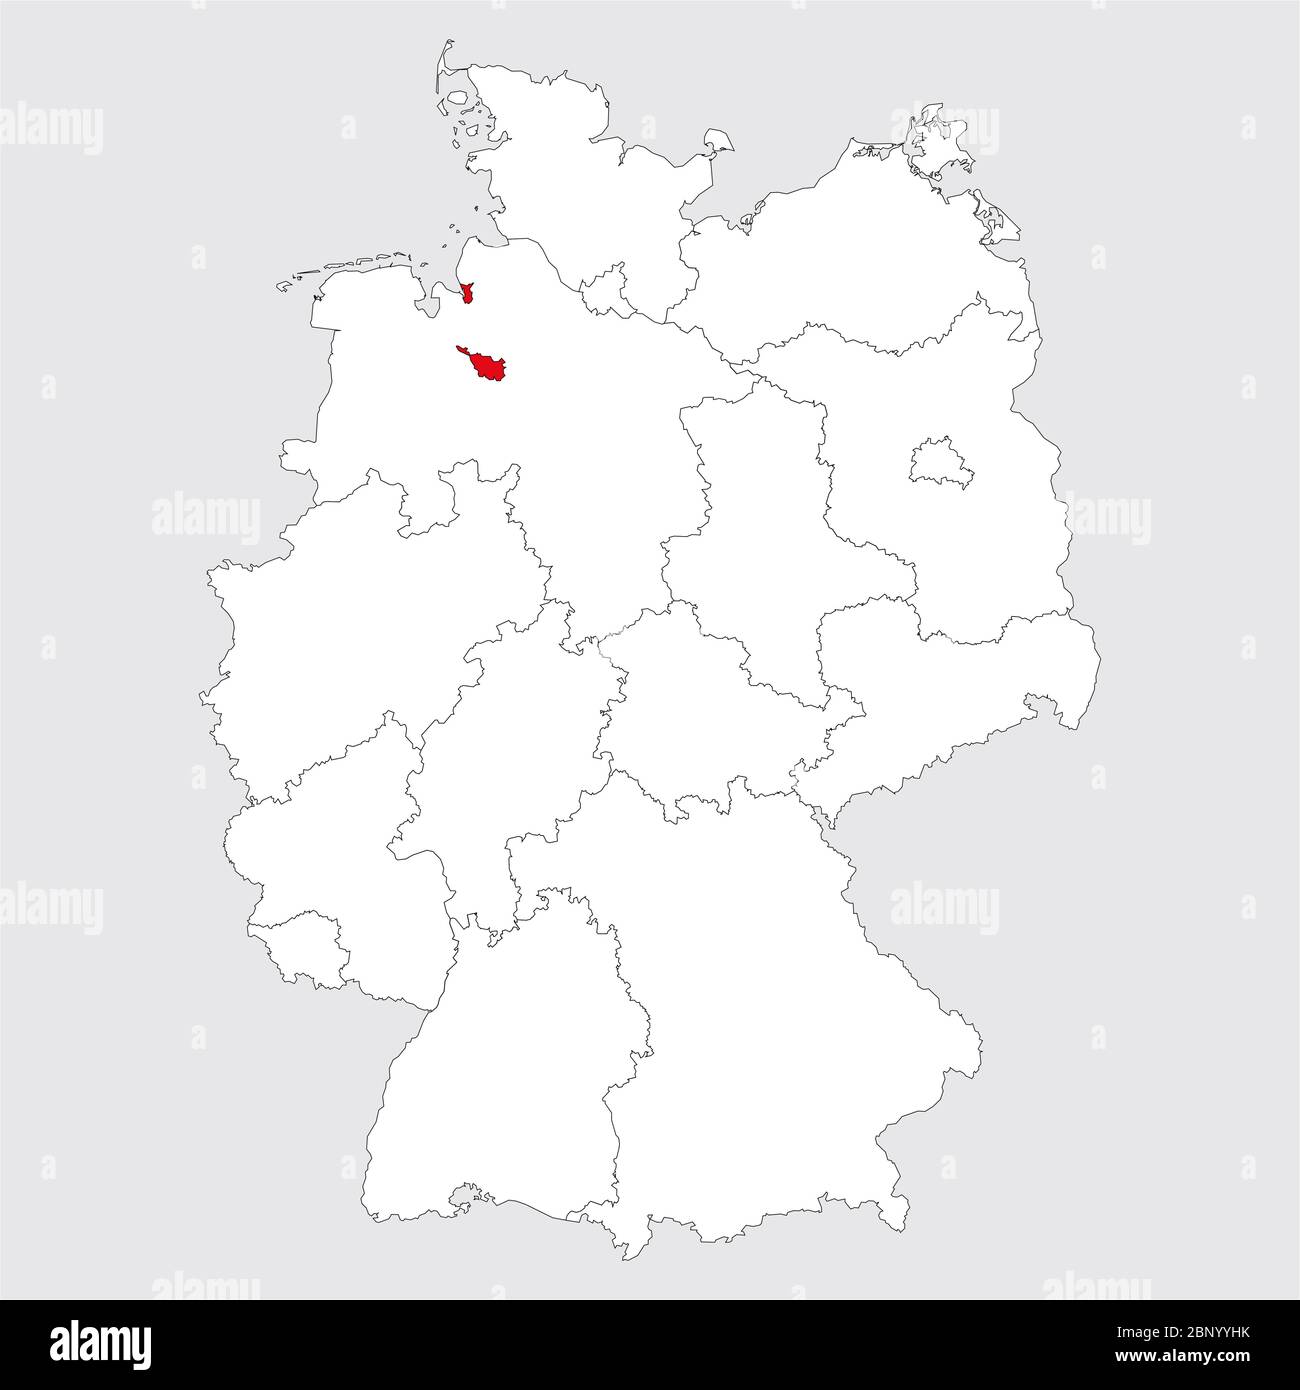 Bremen province highlighted on germany map. Gray background. German political map. Stock Vector